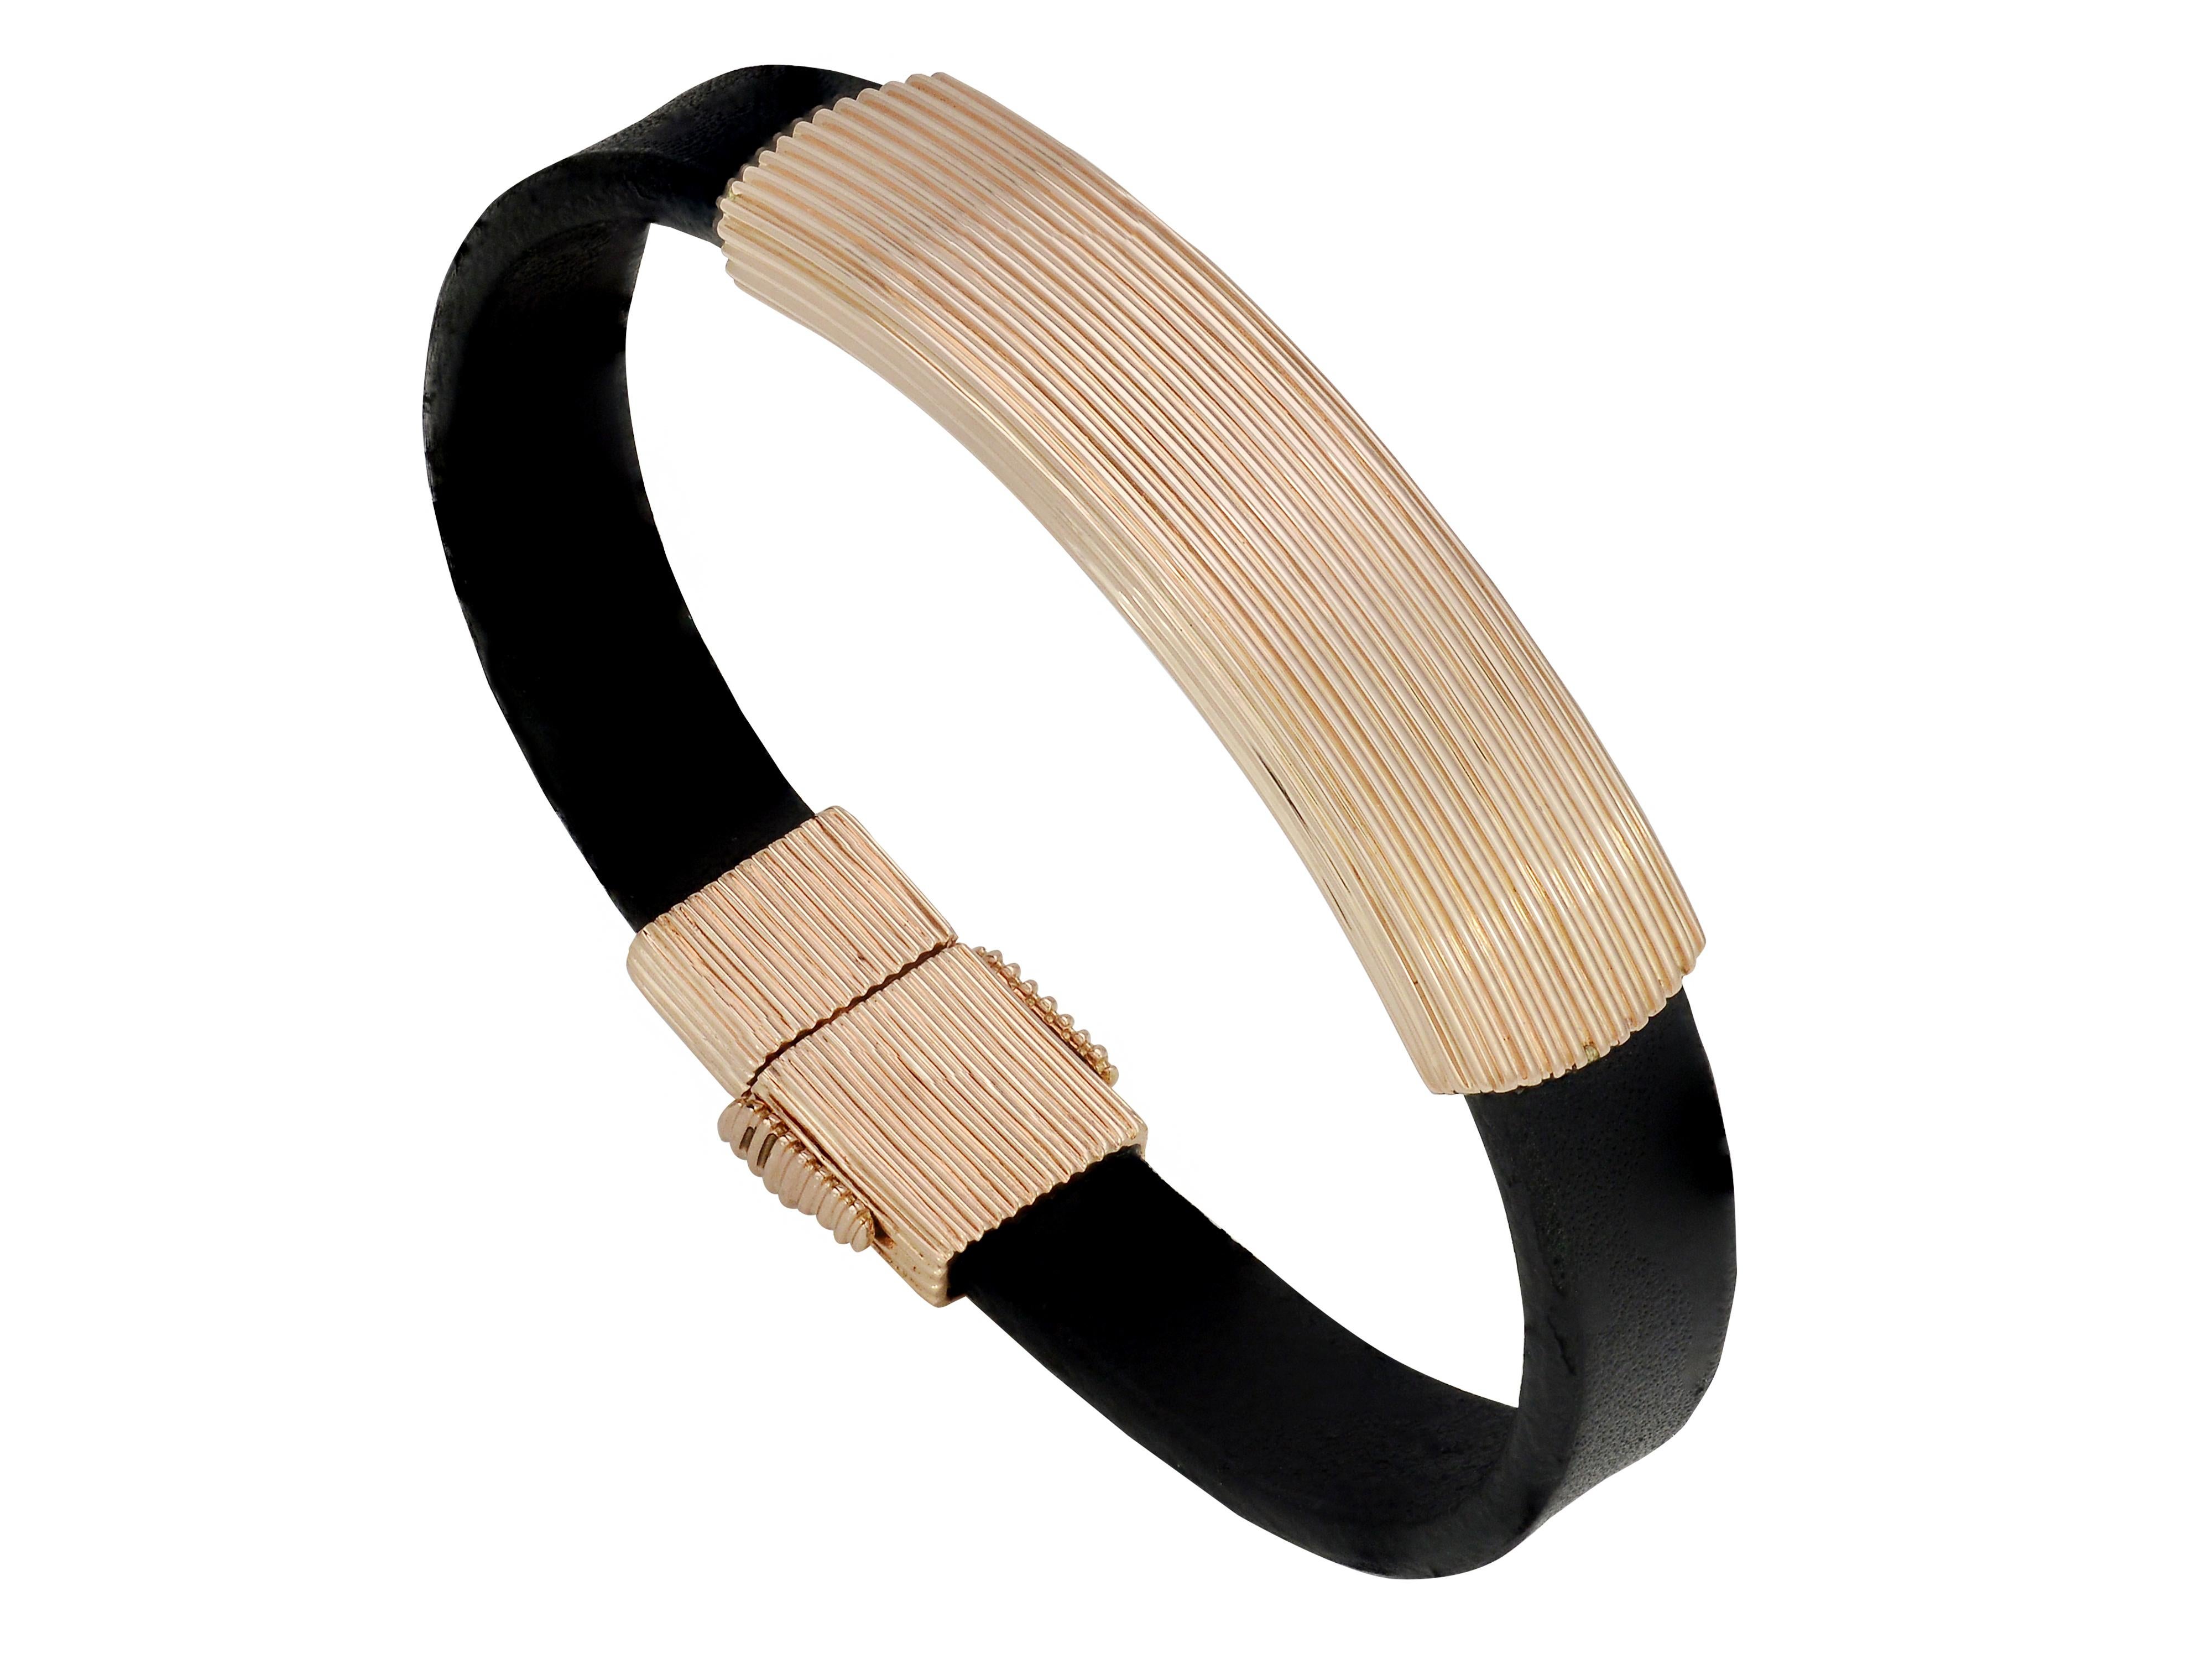 Men's Black Leather and Striated 18 Karat Rose Gold Bracelet From Designer David Yurman. Horizontal Line Design On Top and Outside of Clasp. Inside Is Stamped D. Yurman 750. Secure Clasp With Safety Lock. Weights 62 Grams. Original MSRP $9,000. 